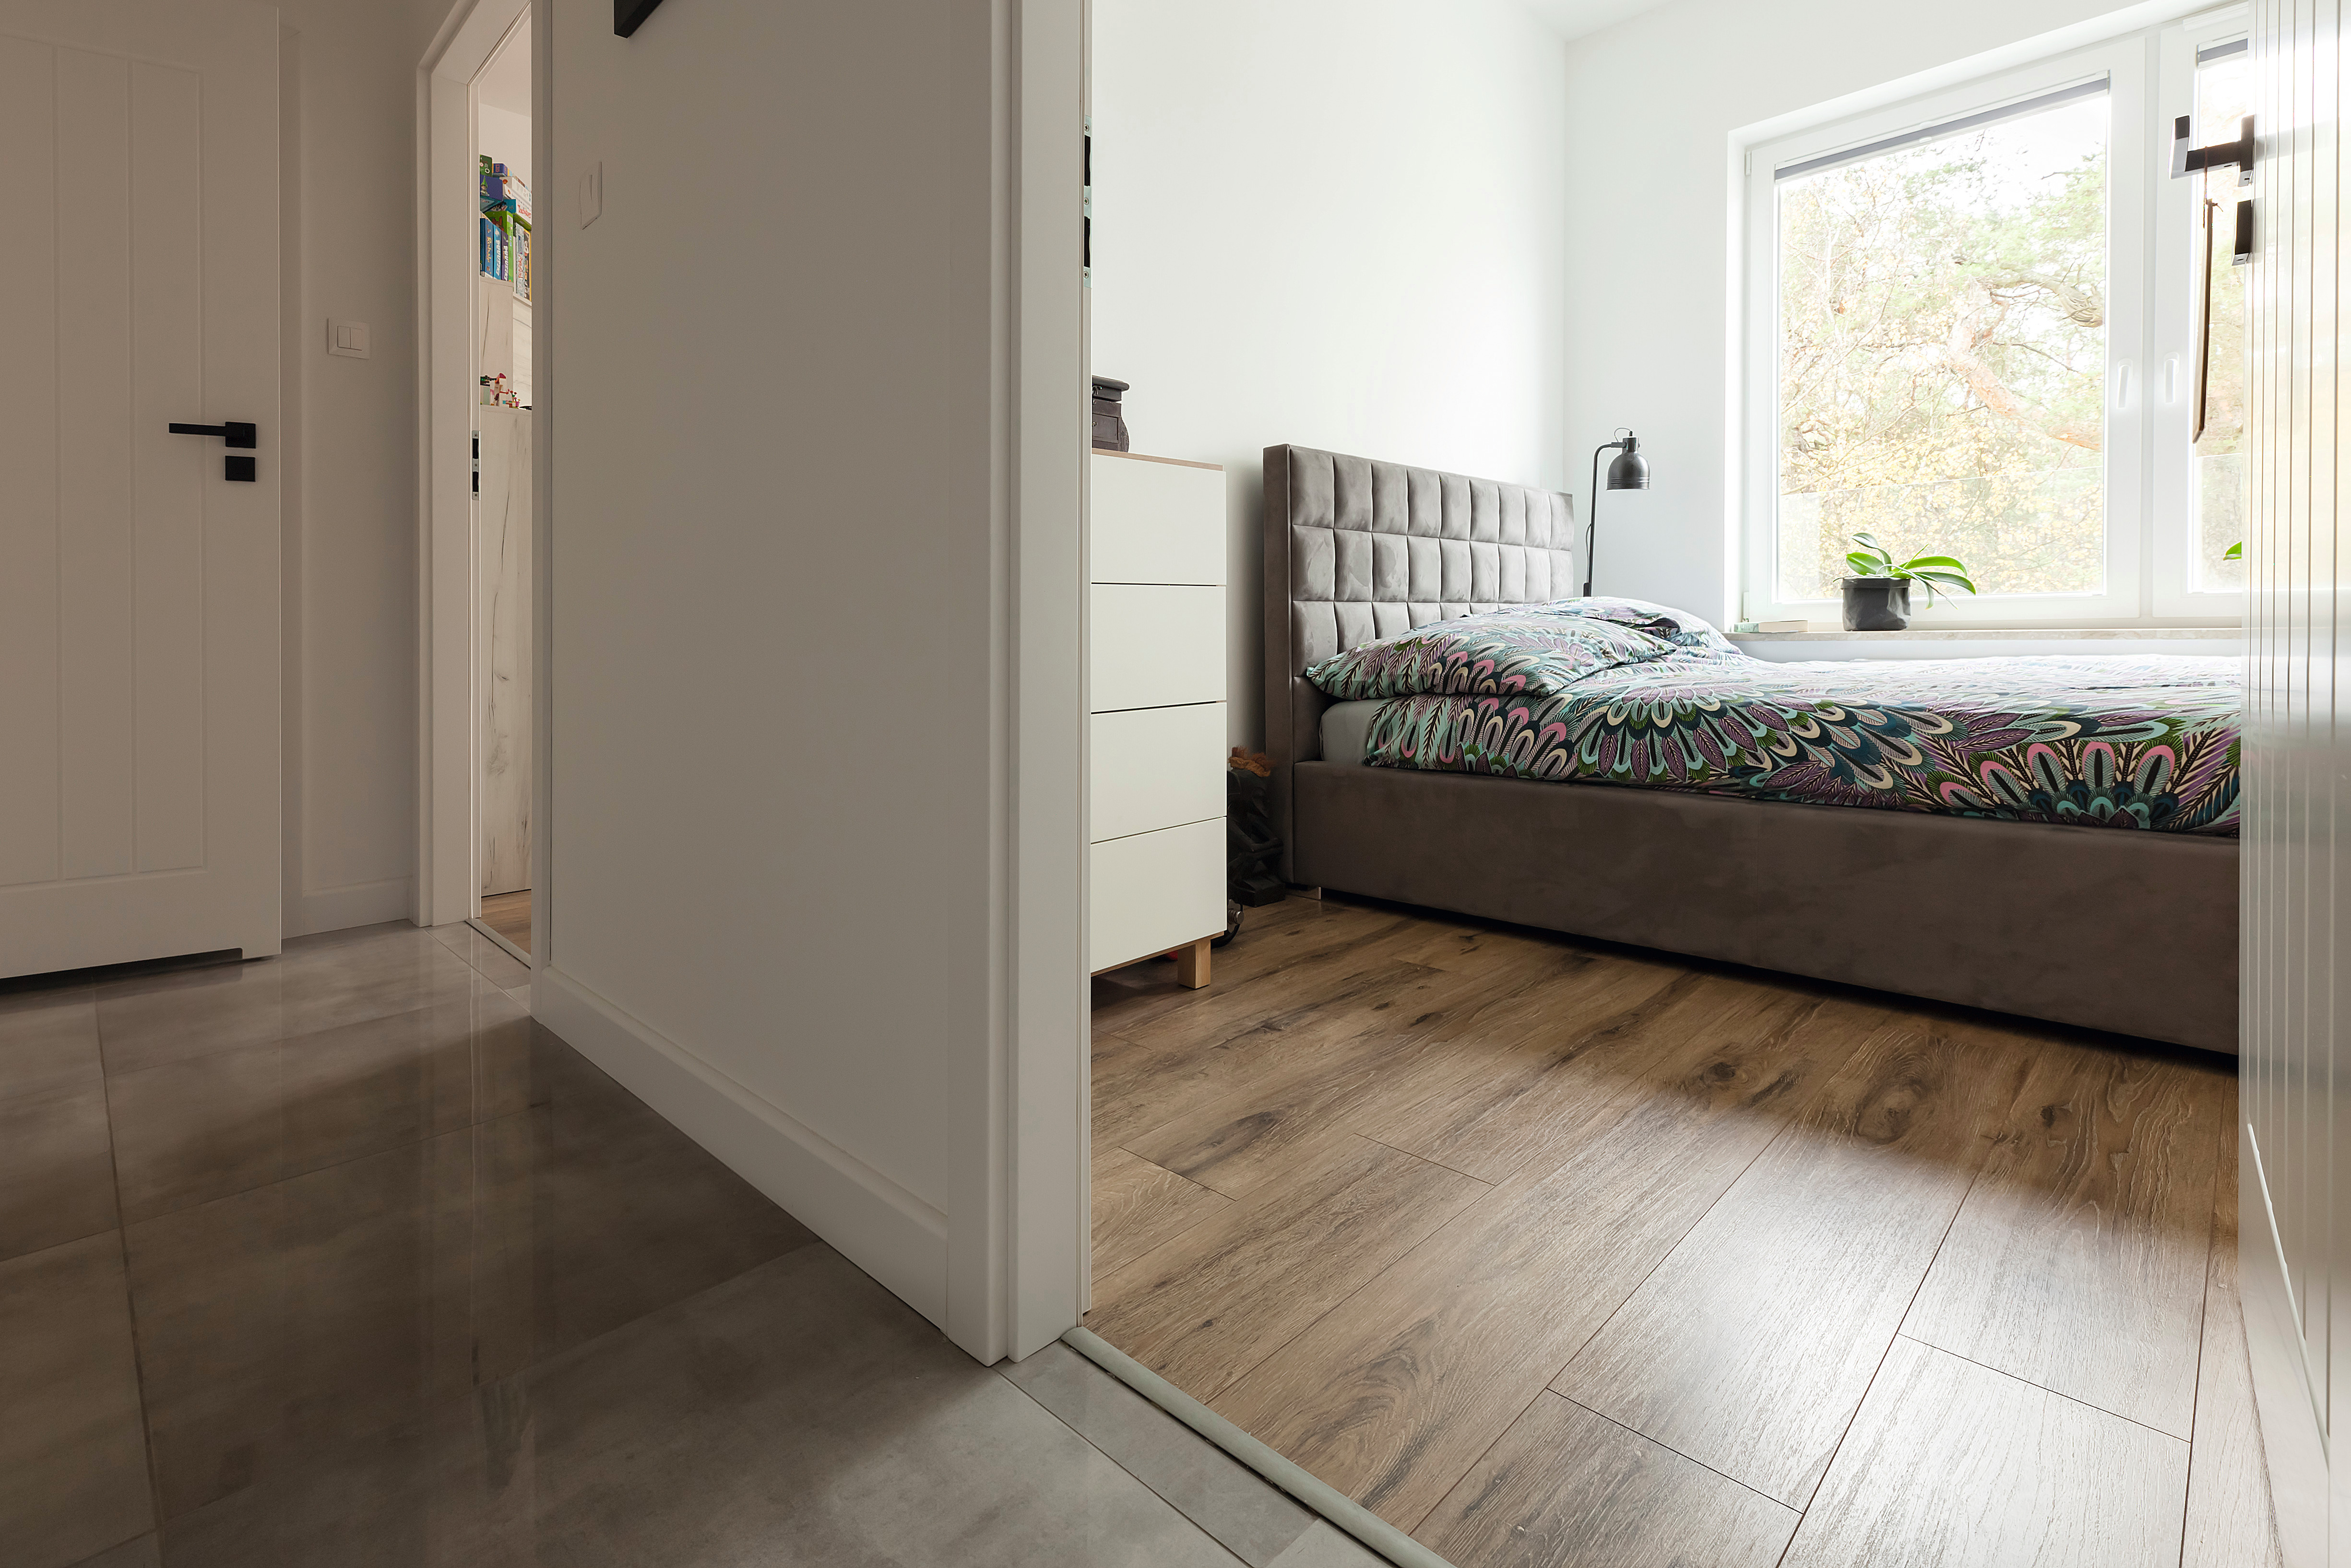 EGGER Laminate Flooring - an all-rounder for every home.